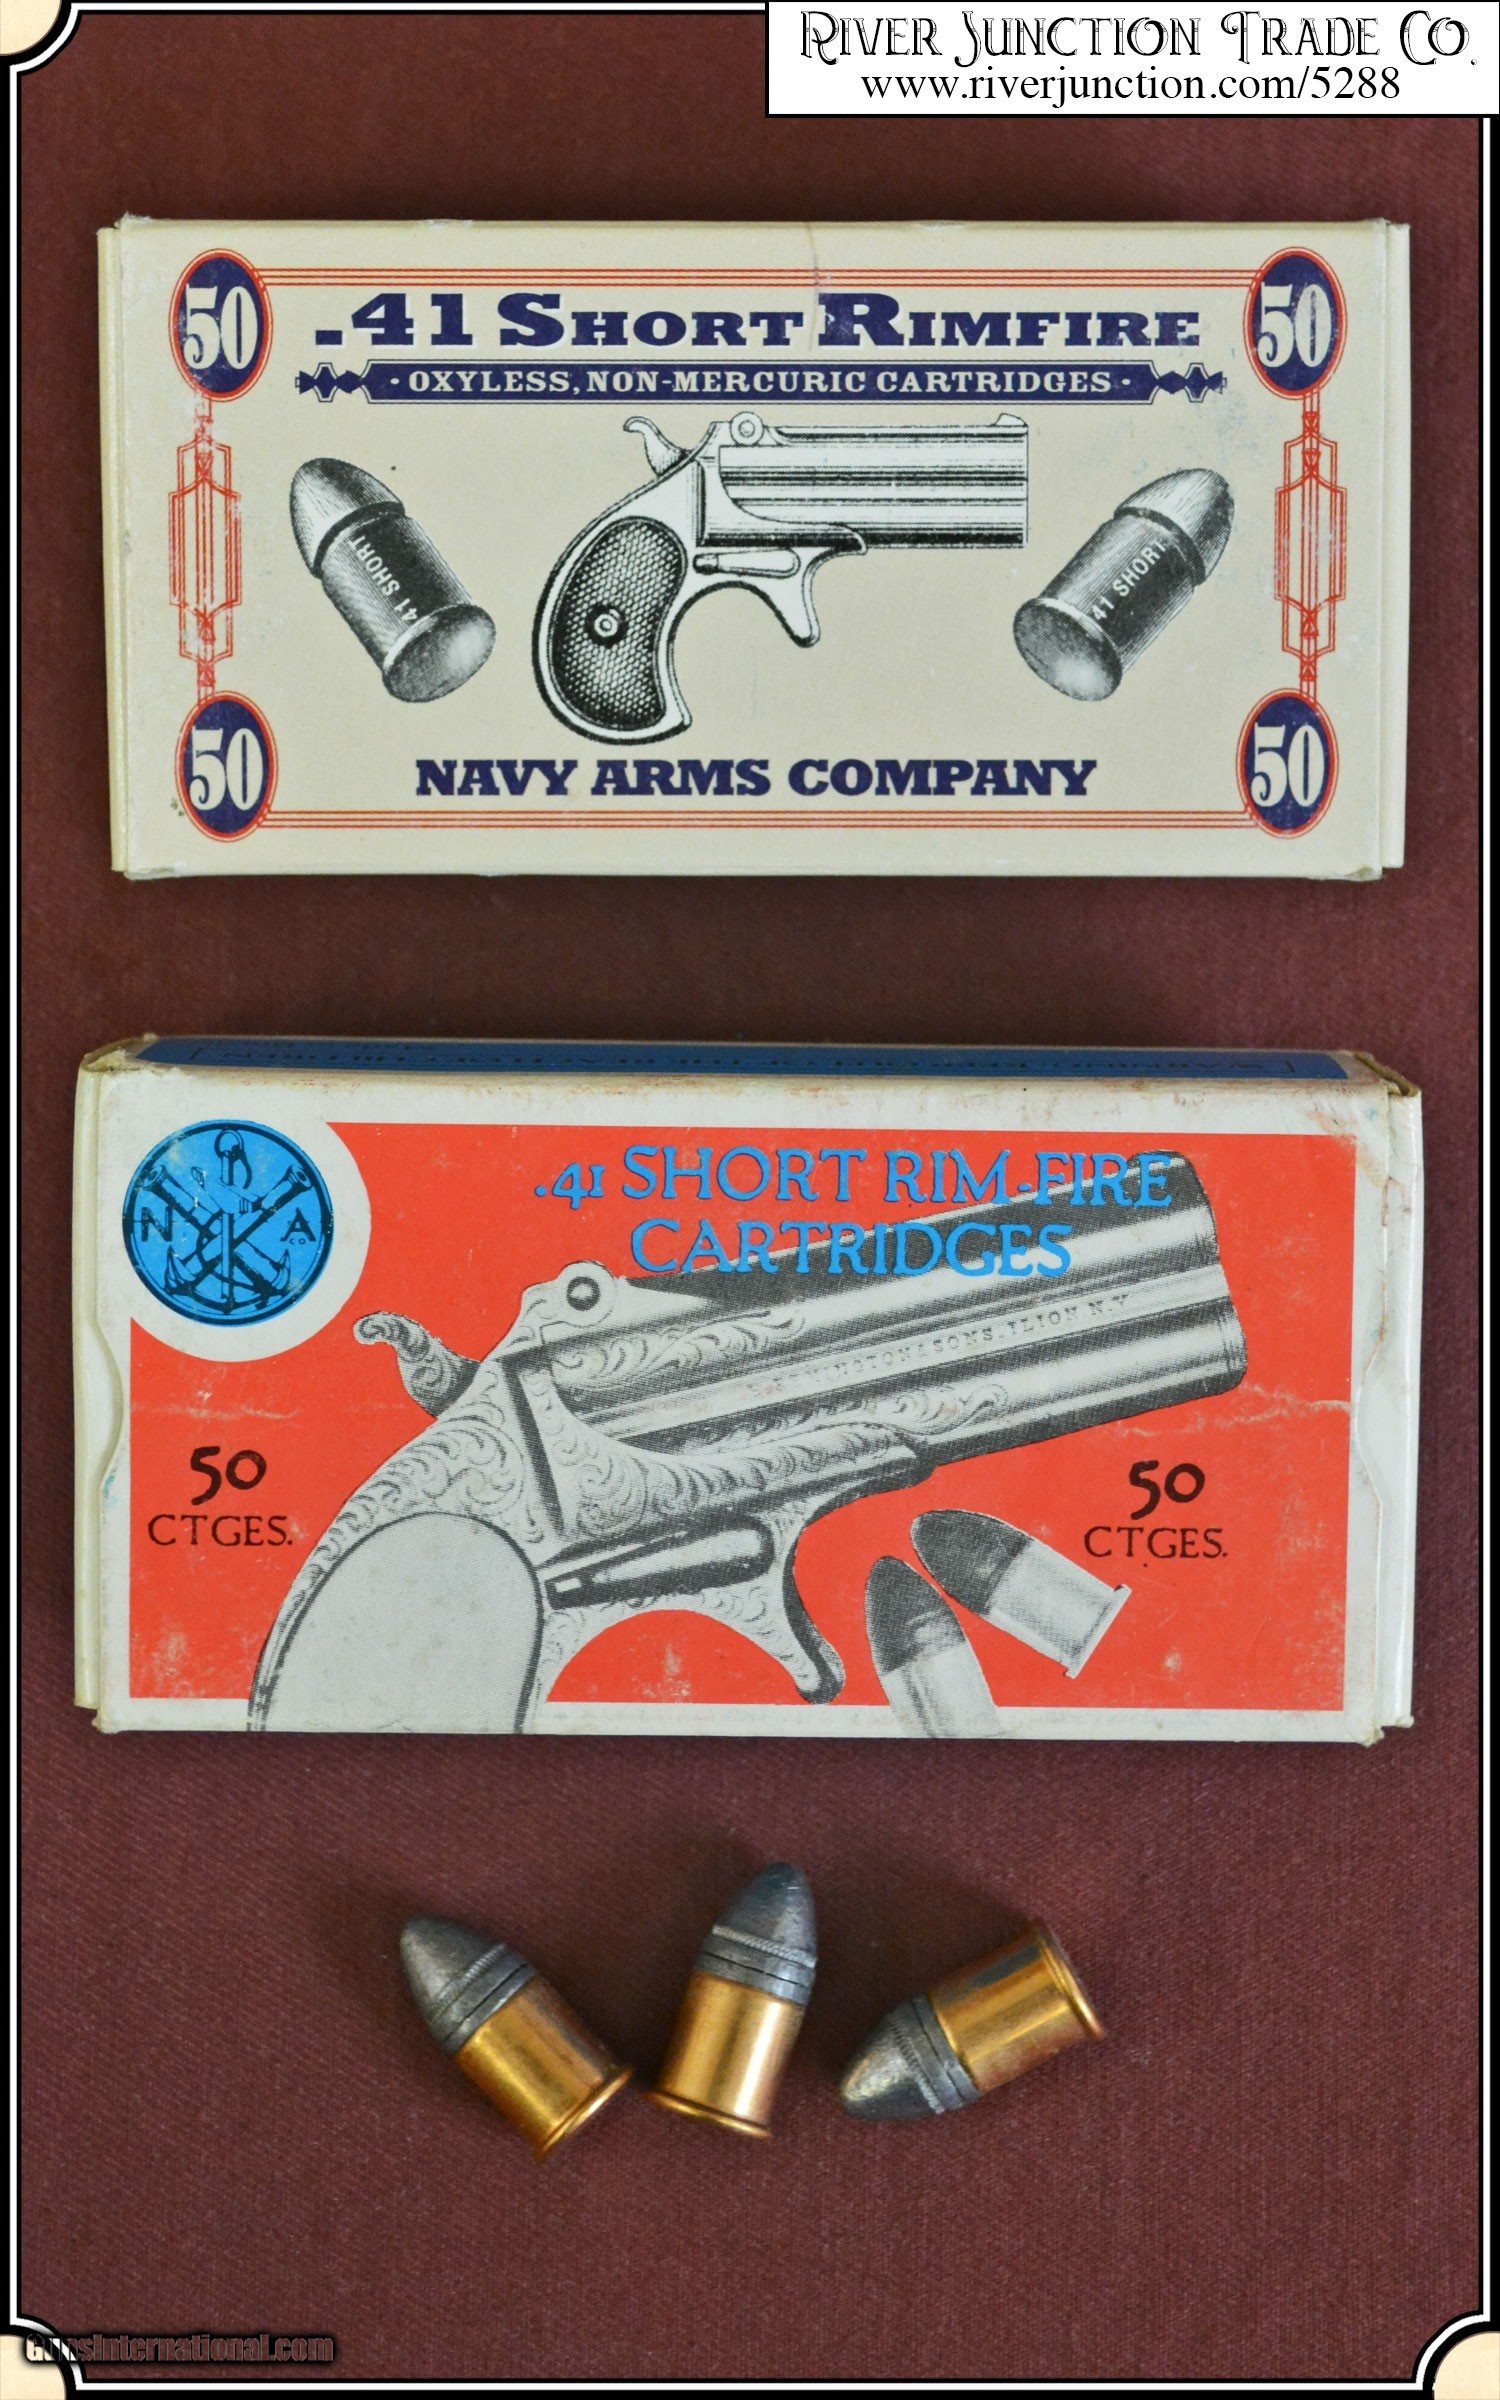 41 caliber Rim-fire ammo by Navy Arms 1 box of 50 rounds